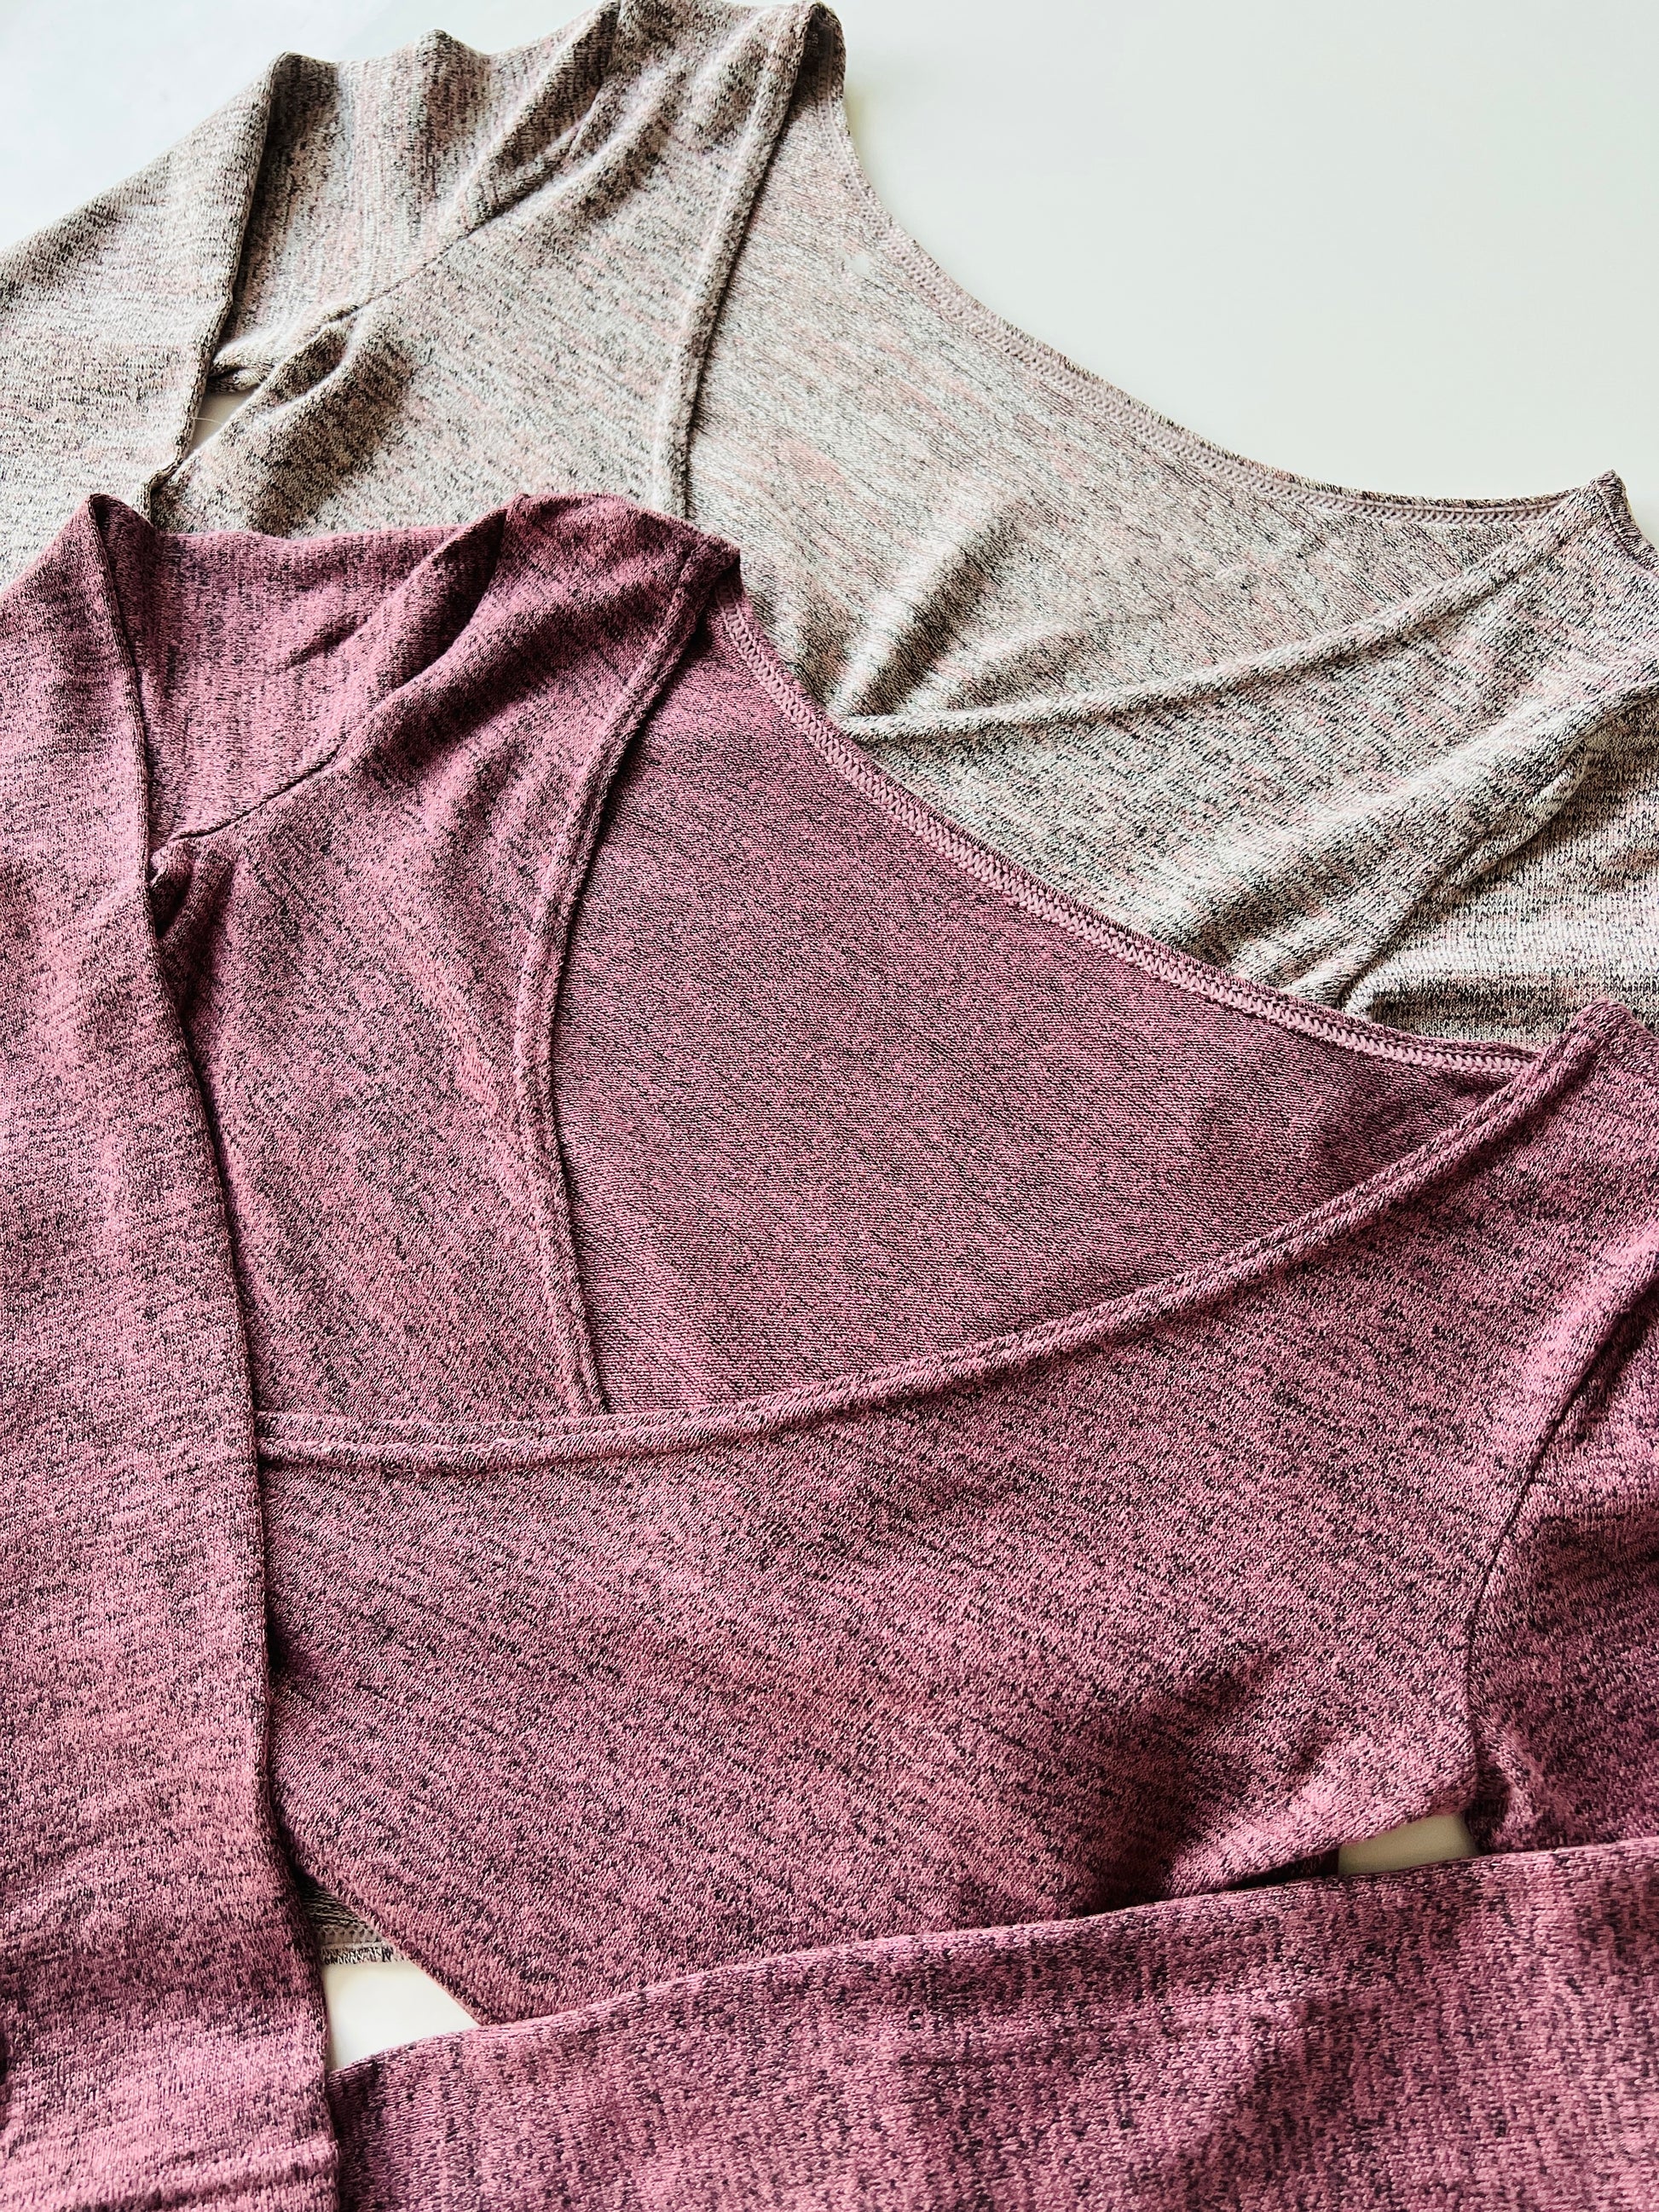 Warm-Up Soft Knit Wrap Top - Grey and Pink from The Collective Dancewear